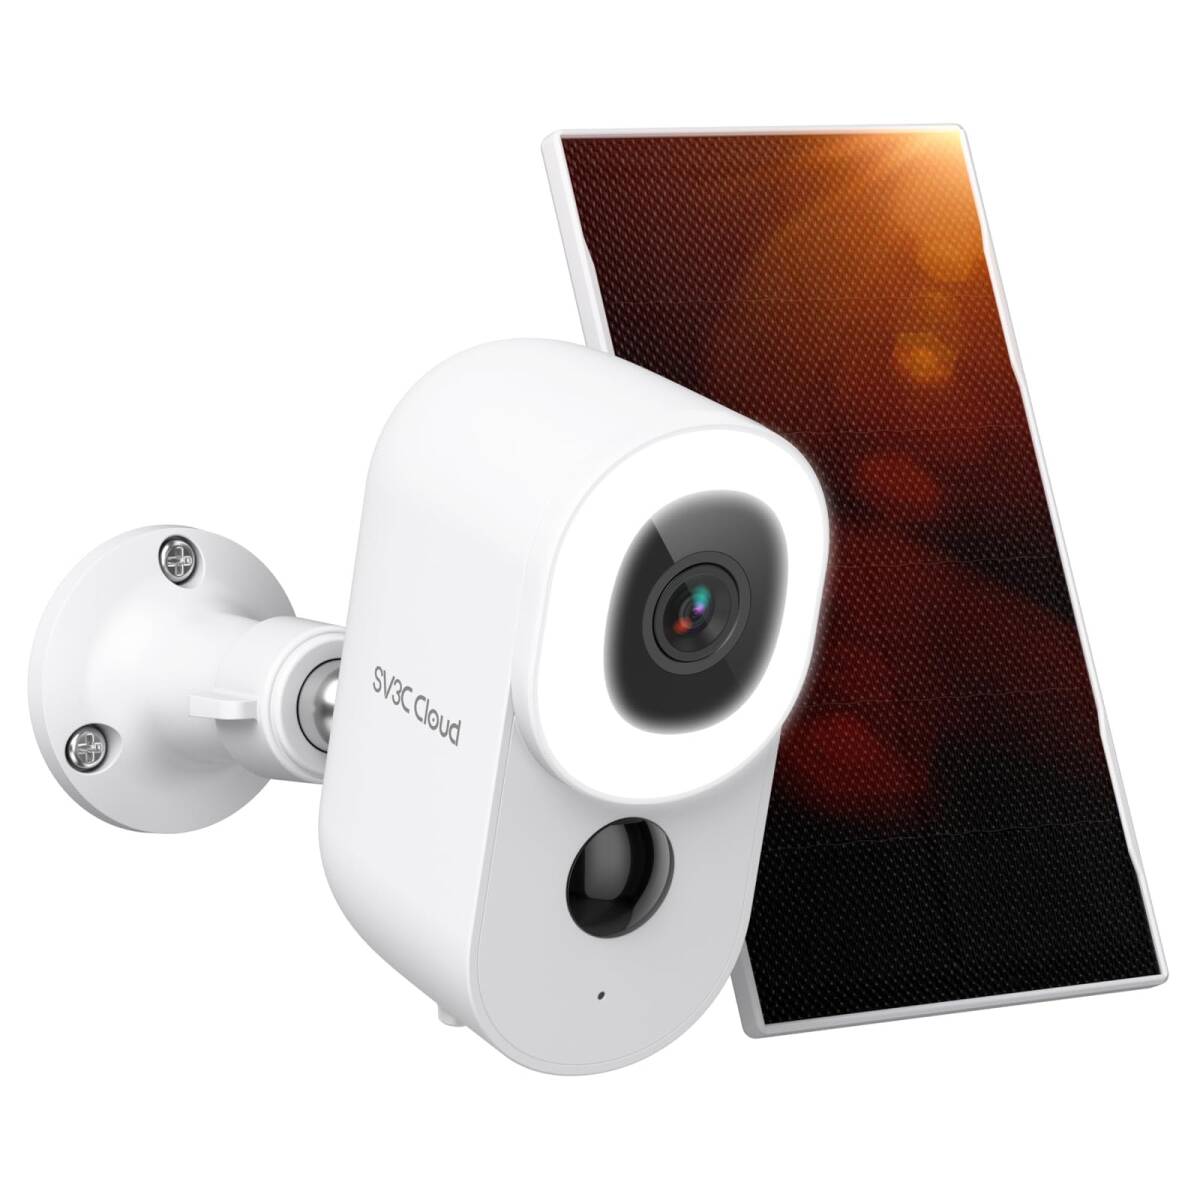 * 3MP solar security camera - outdoors for wireless monitoring 